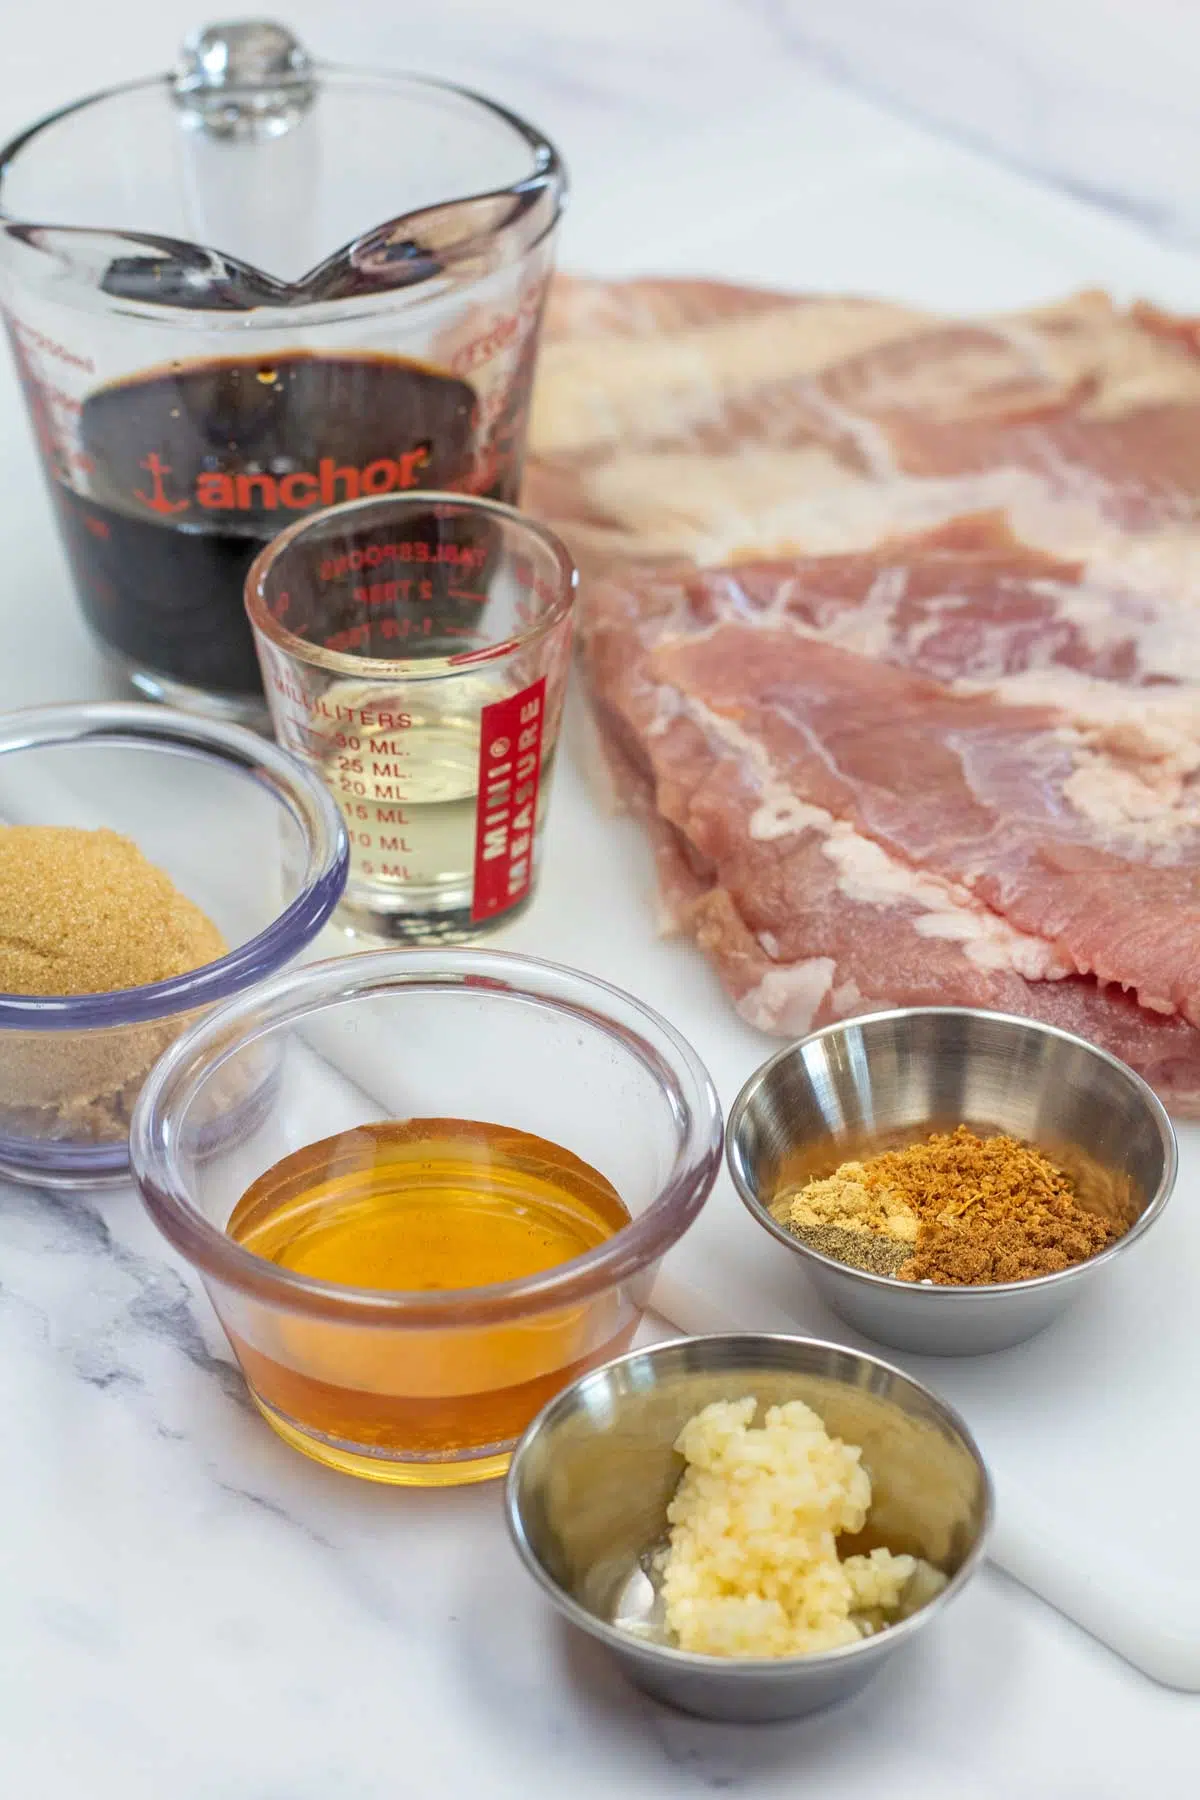 Tall image showing ingredients needed for roasted pork belly slices.